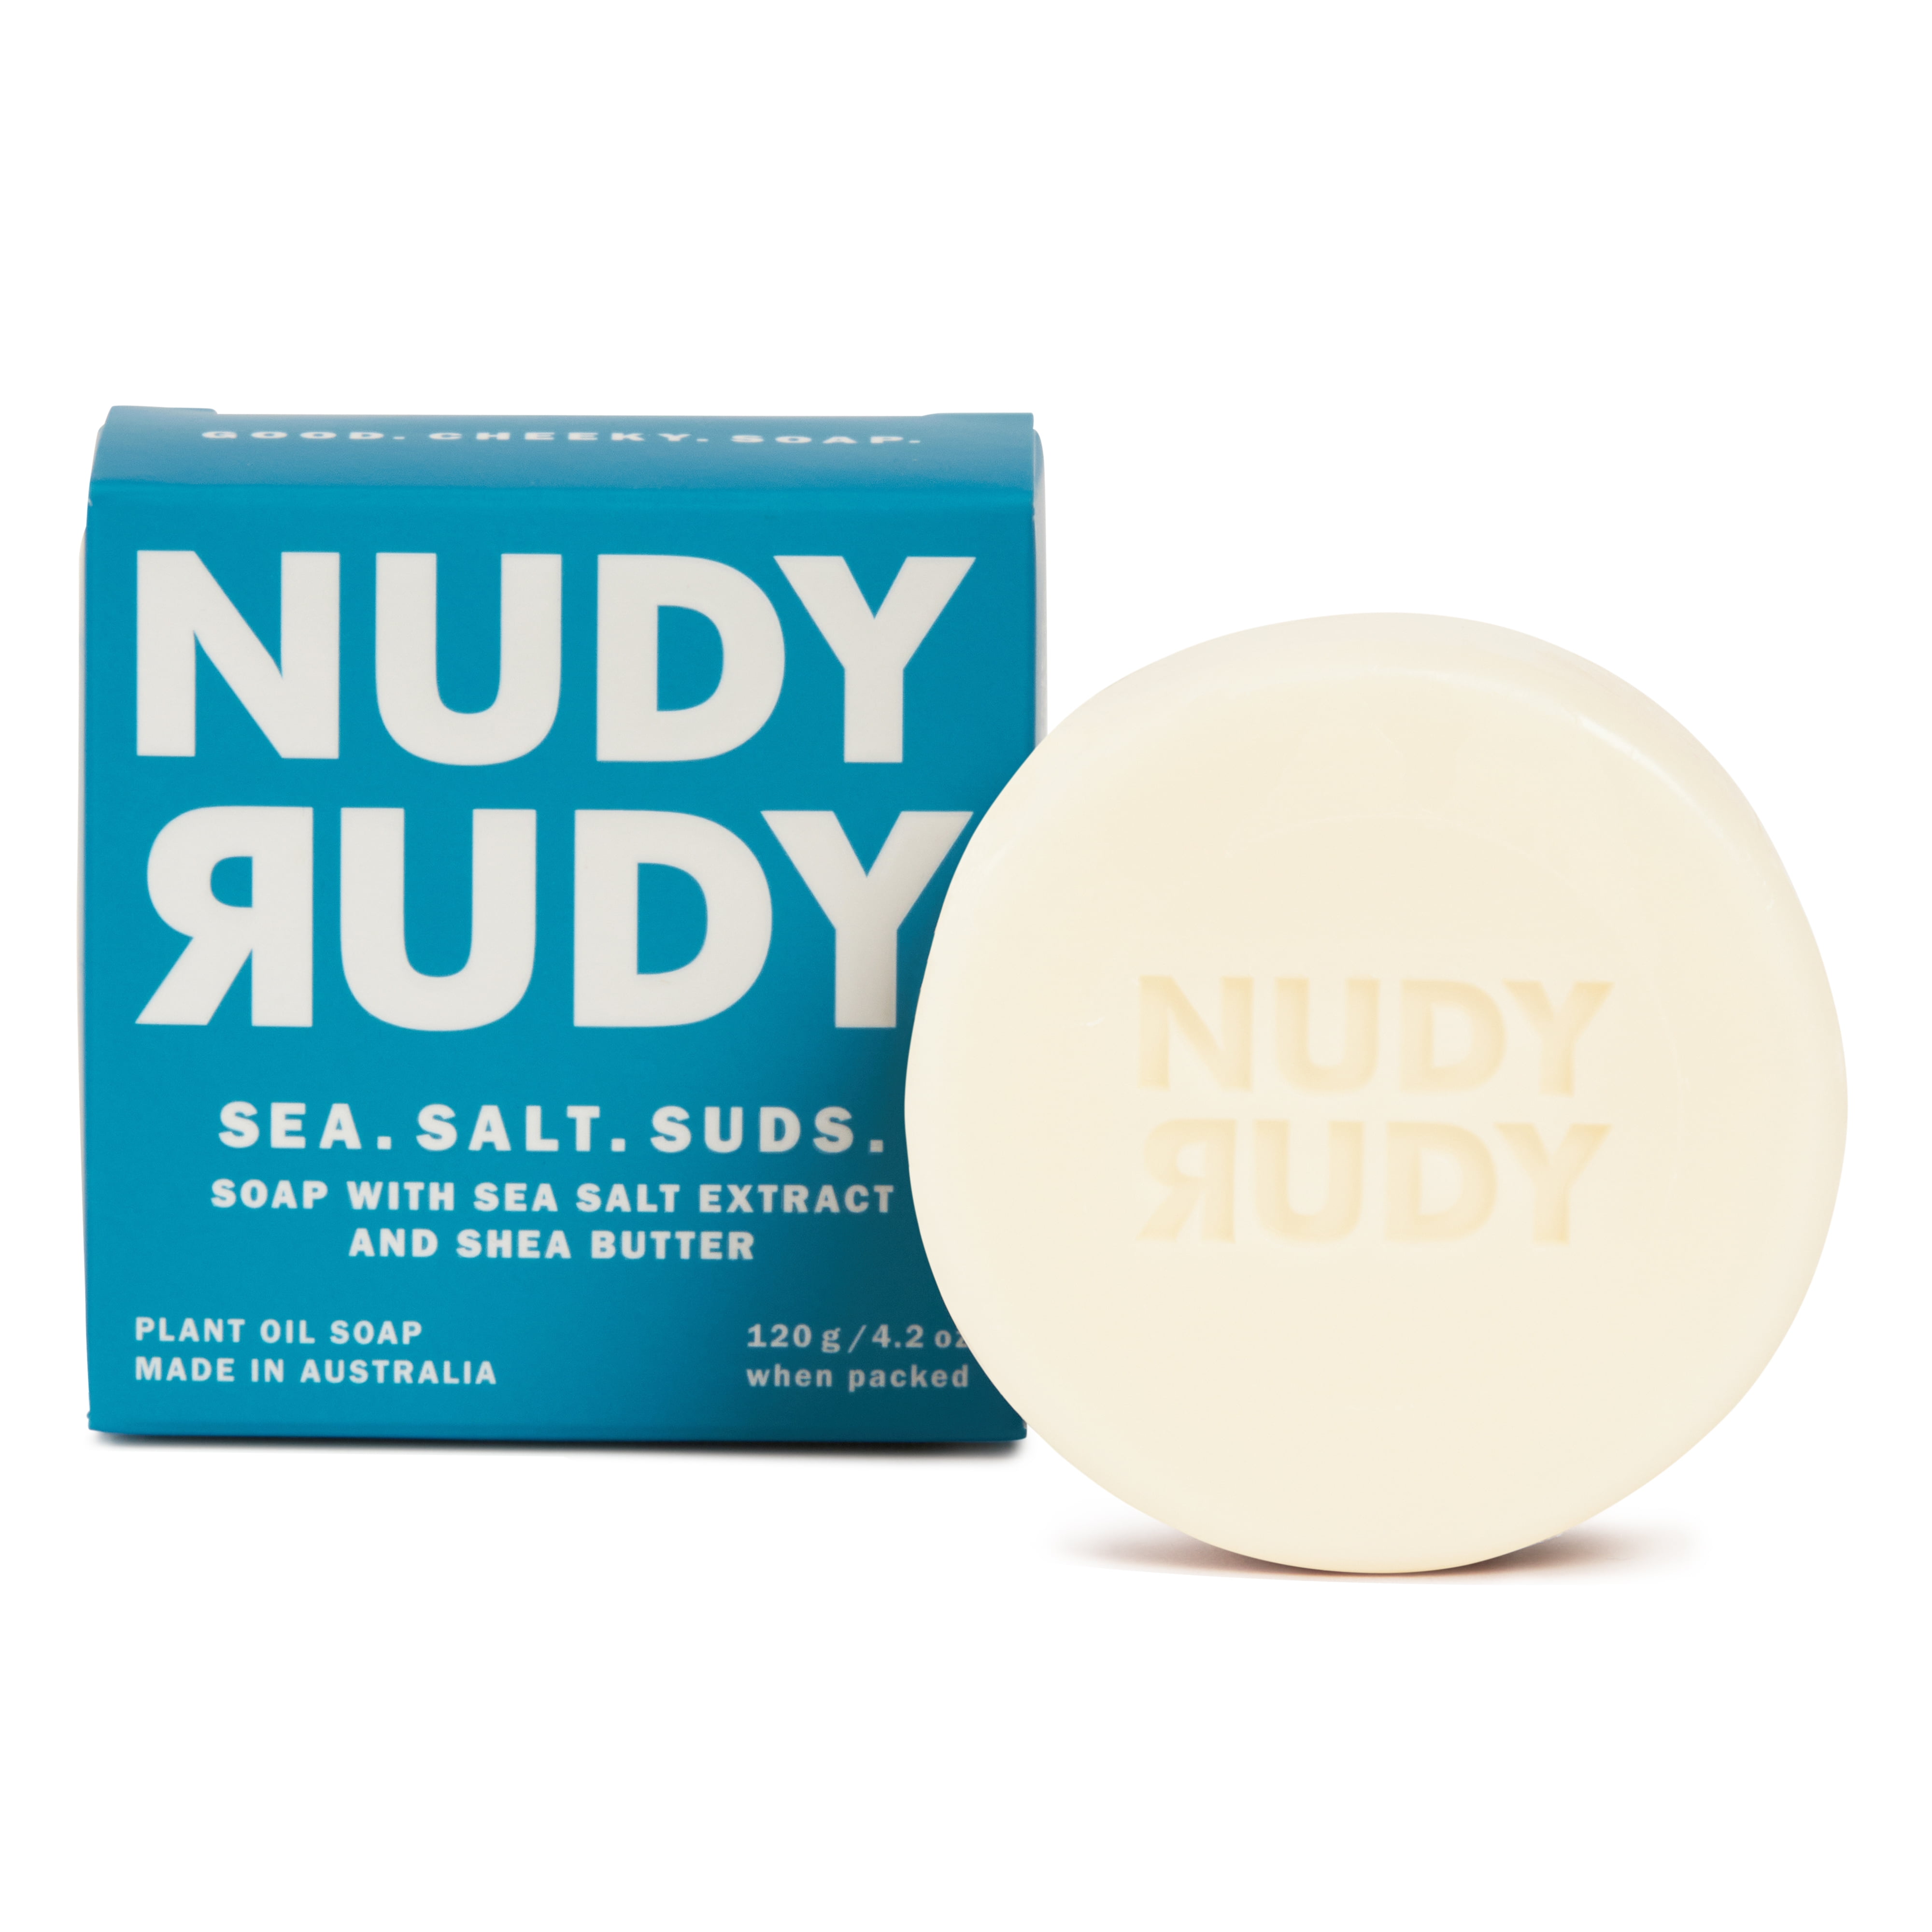 Nudy Rudy Sea.Salt.Suds  Soap with Sea Salt Extract and Shea Butter  4.2oz